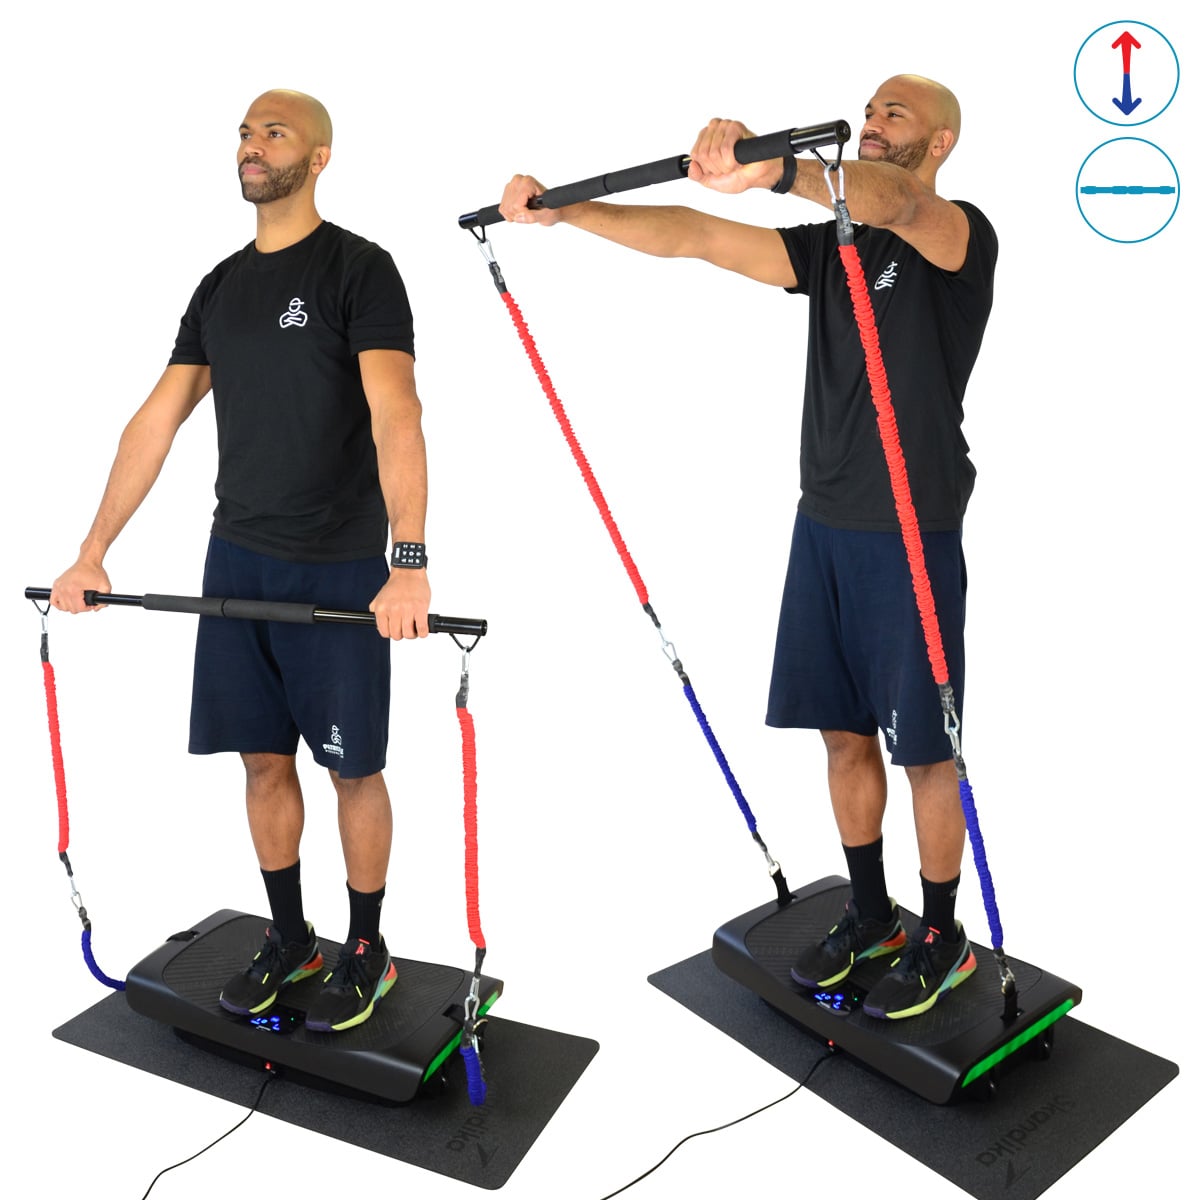 Multi-Resistance Bands: 24 exercises for your vibration plate